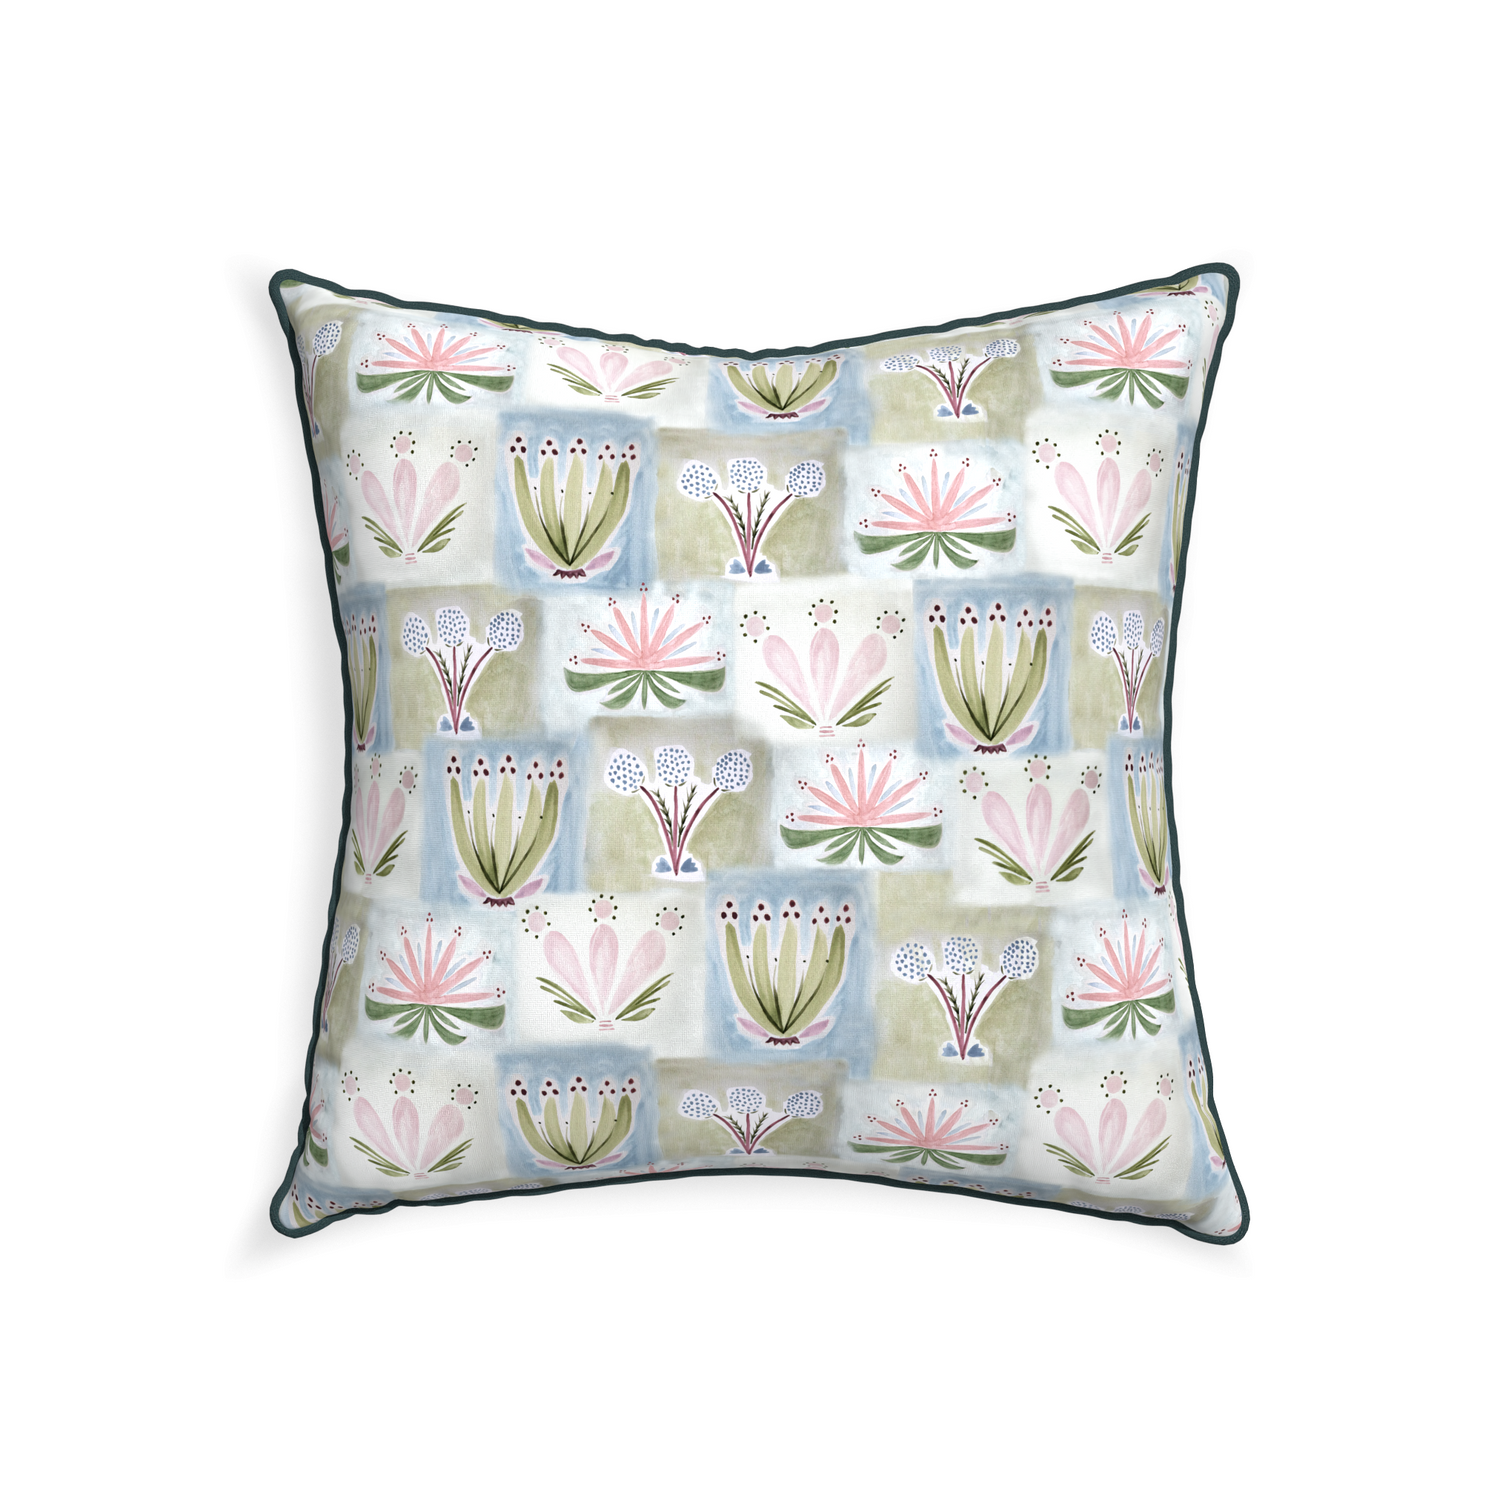 22-square harper custom hand-painted floralpillow with p piping on white background